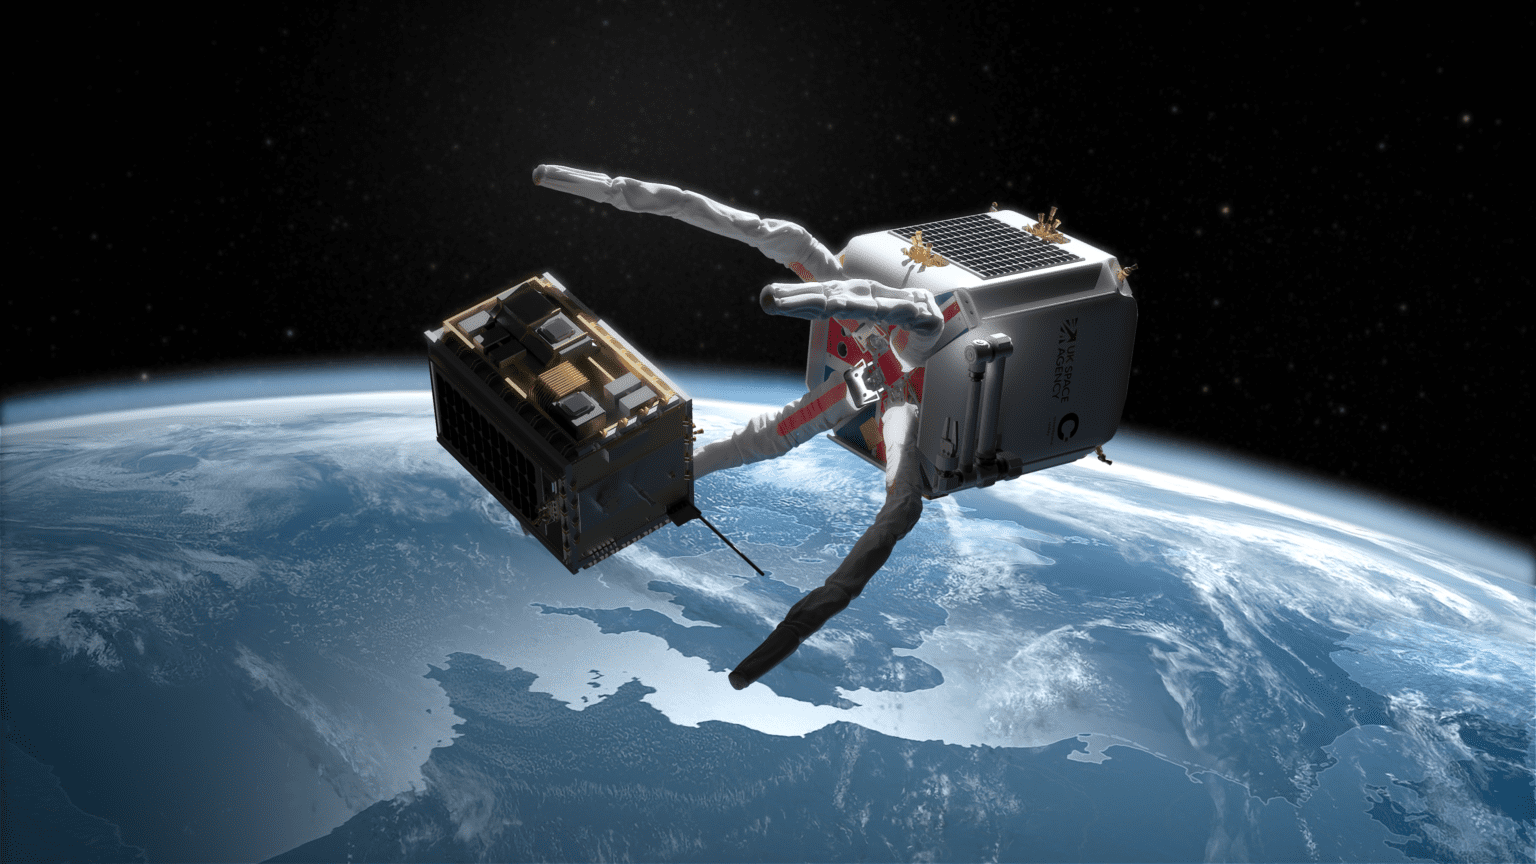 A rendering of the Clear servicer capturing a derelict satellite.